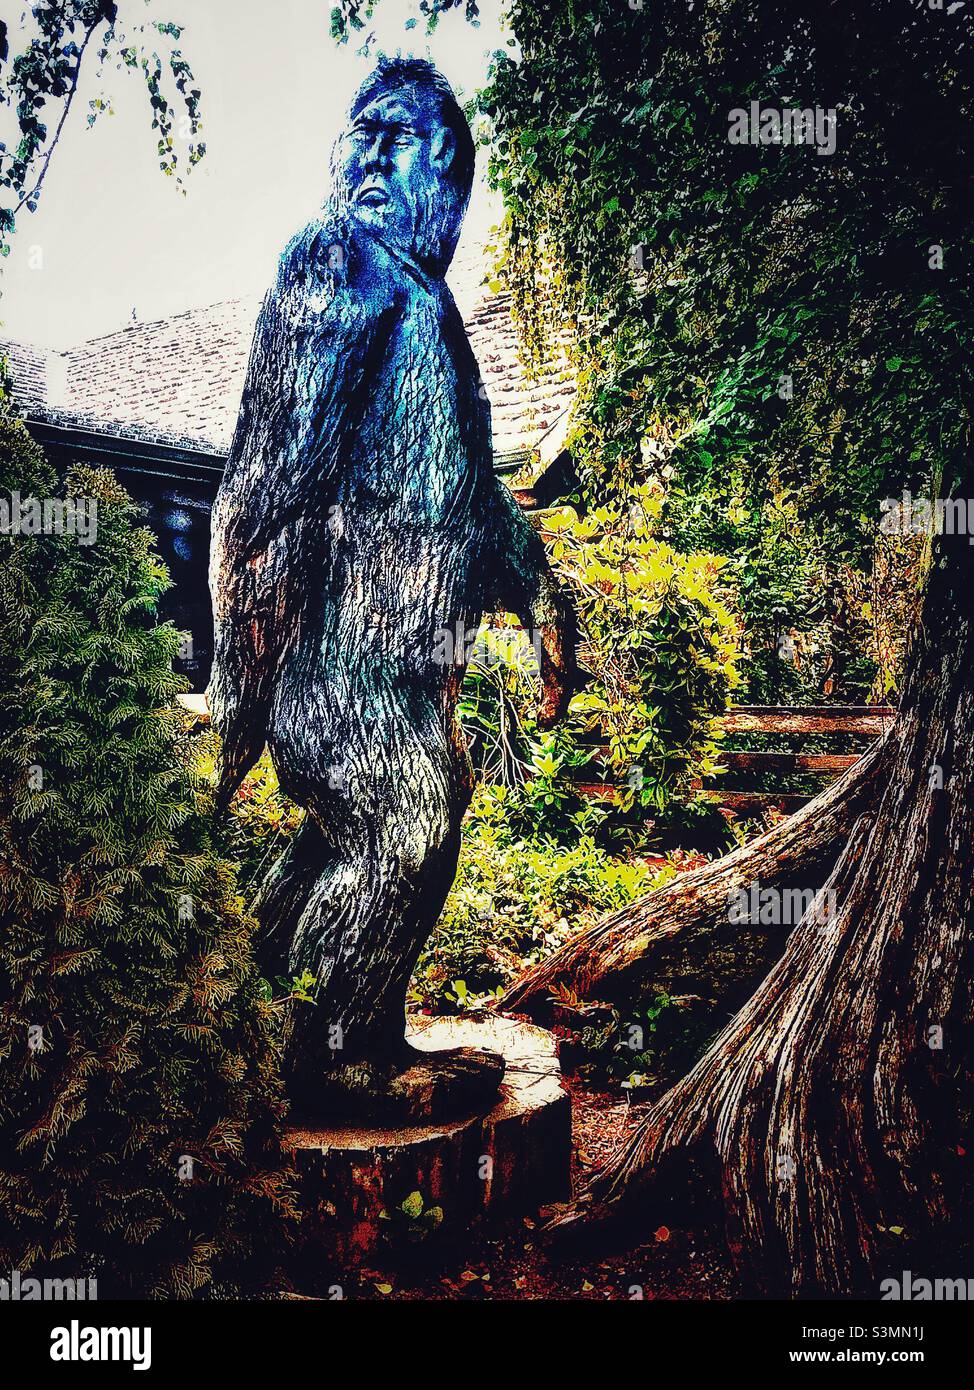 High contrast photo of Big Foot sculpture Stock Photo